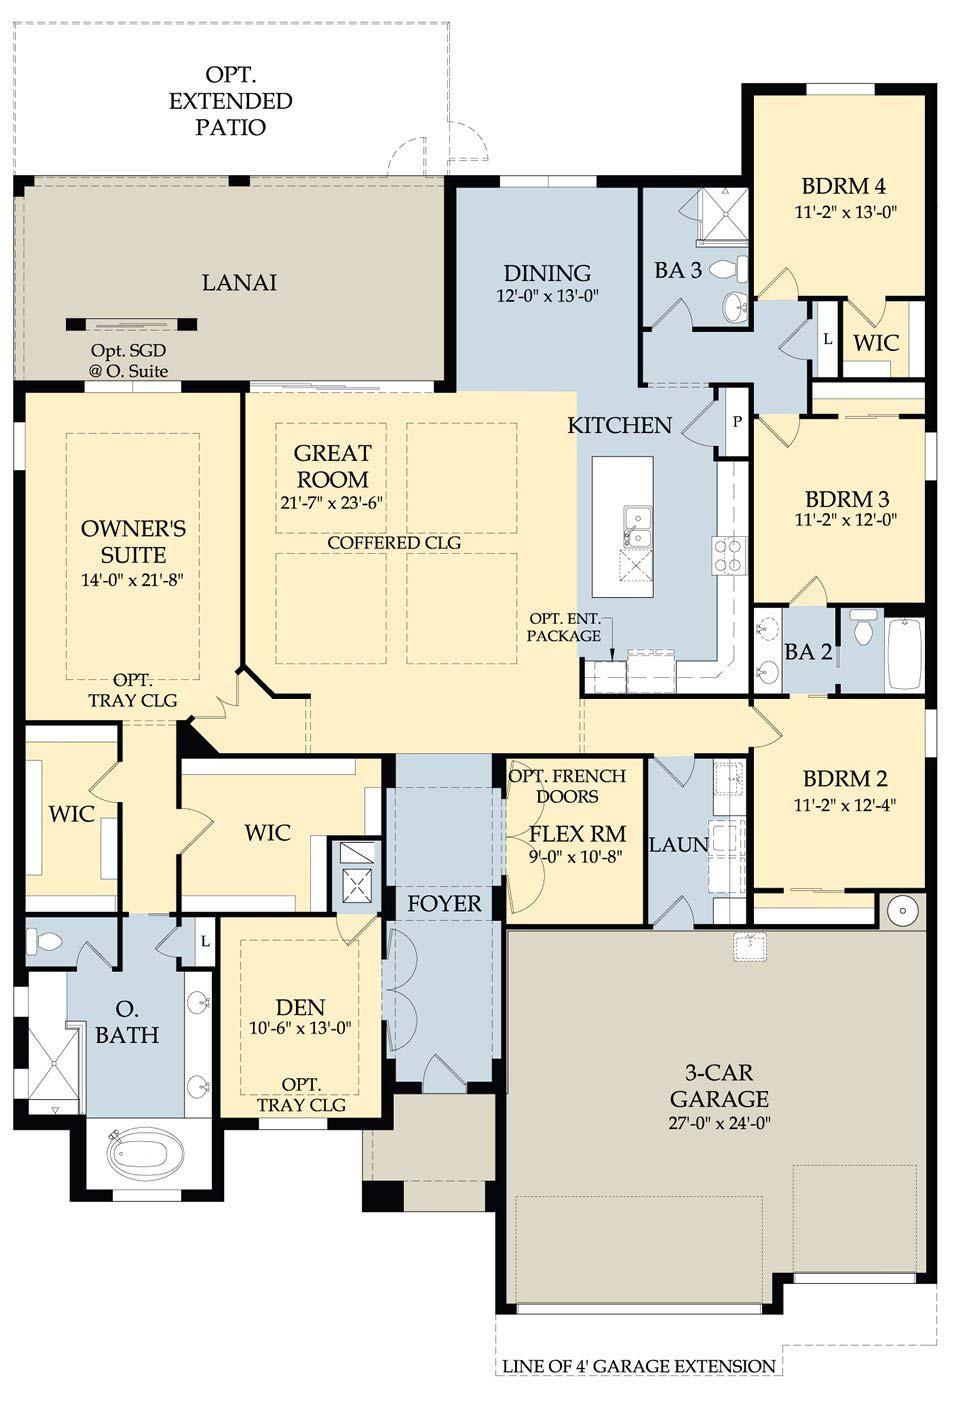 Windsor II Floor Plan in Quarry Shores at The Quarry by Pulte, 3,078 Square Feet, Single Family Home, 4 Bedrooms, 3 Baths